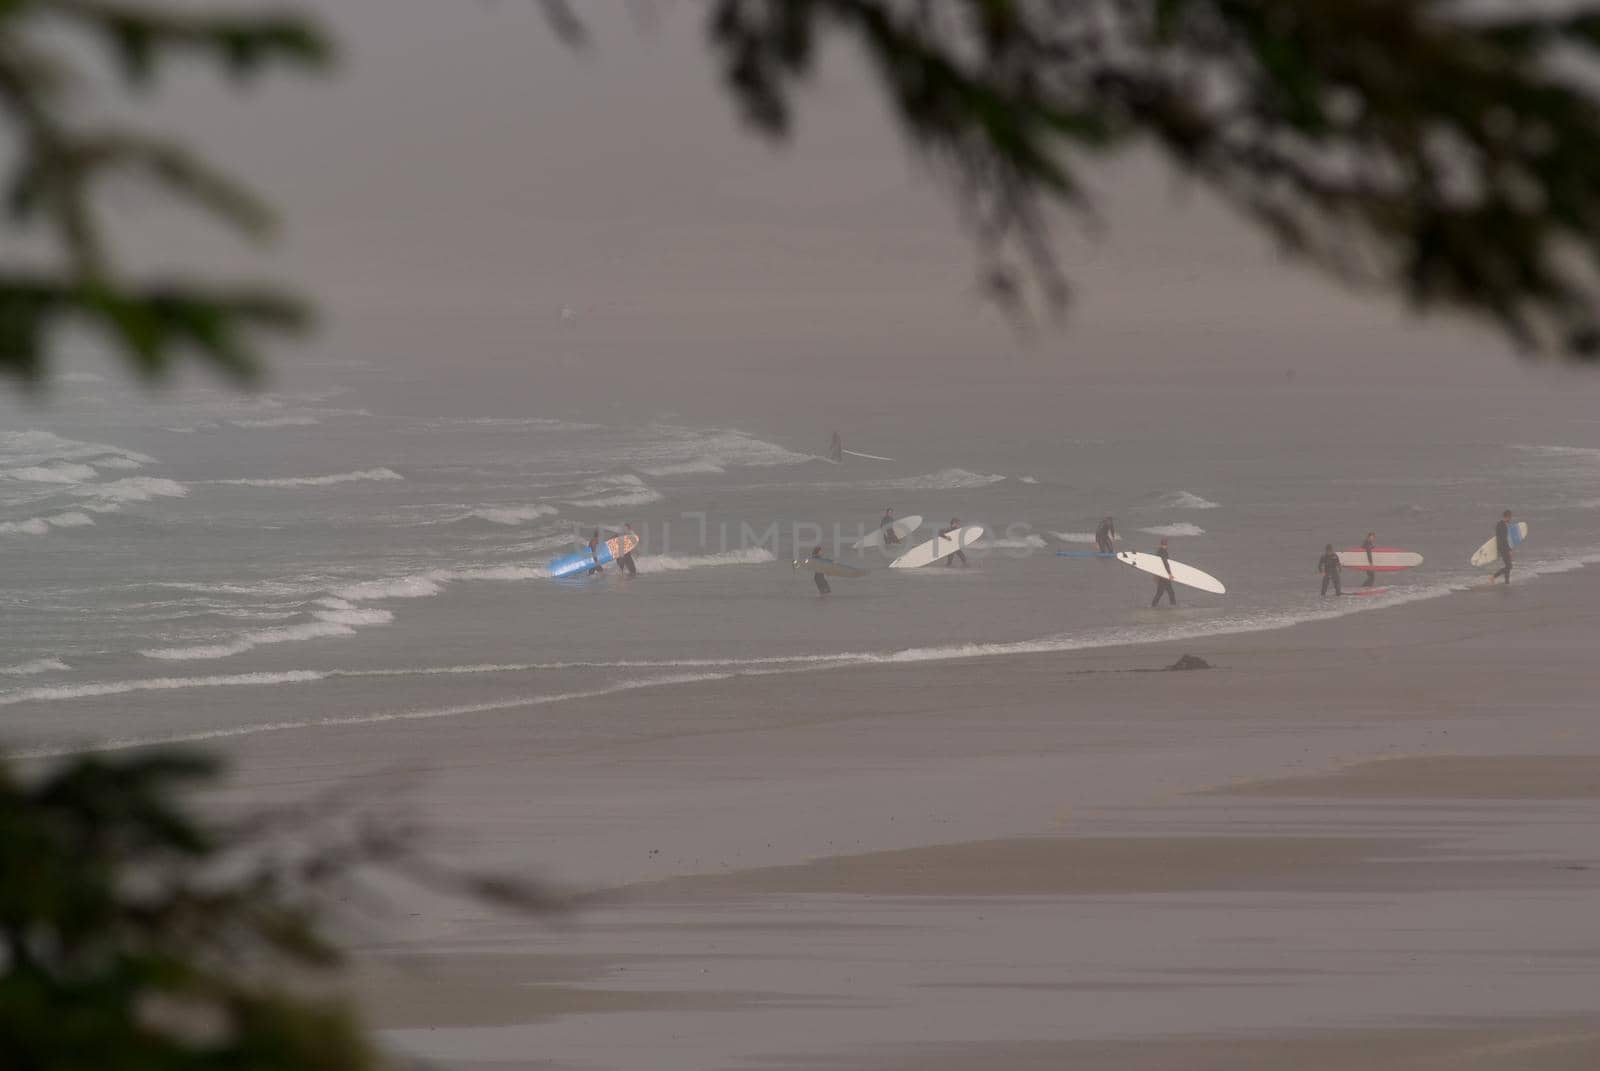 A crowd of Surfers in the Waves on a Misty Day in Tofino British Columbia in Canada by markvandam